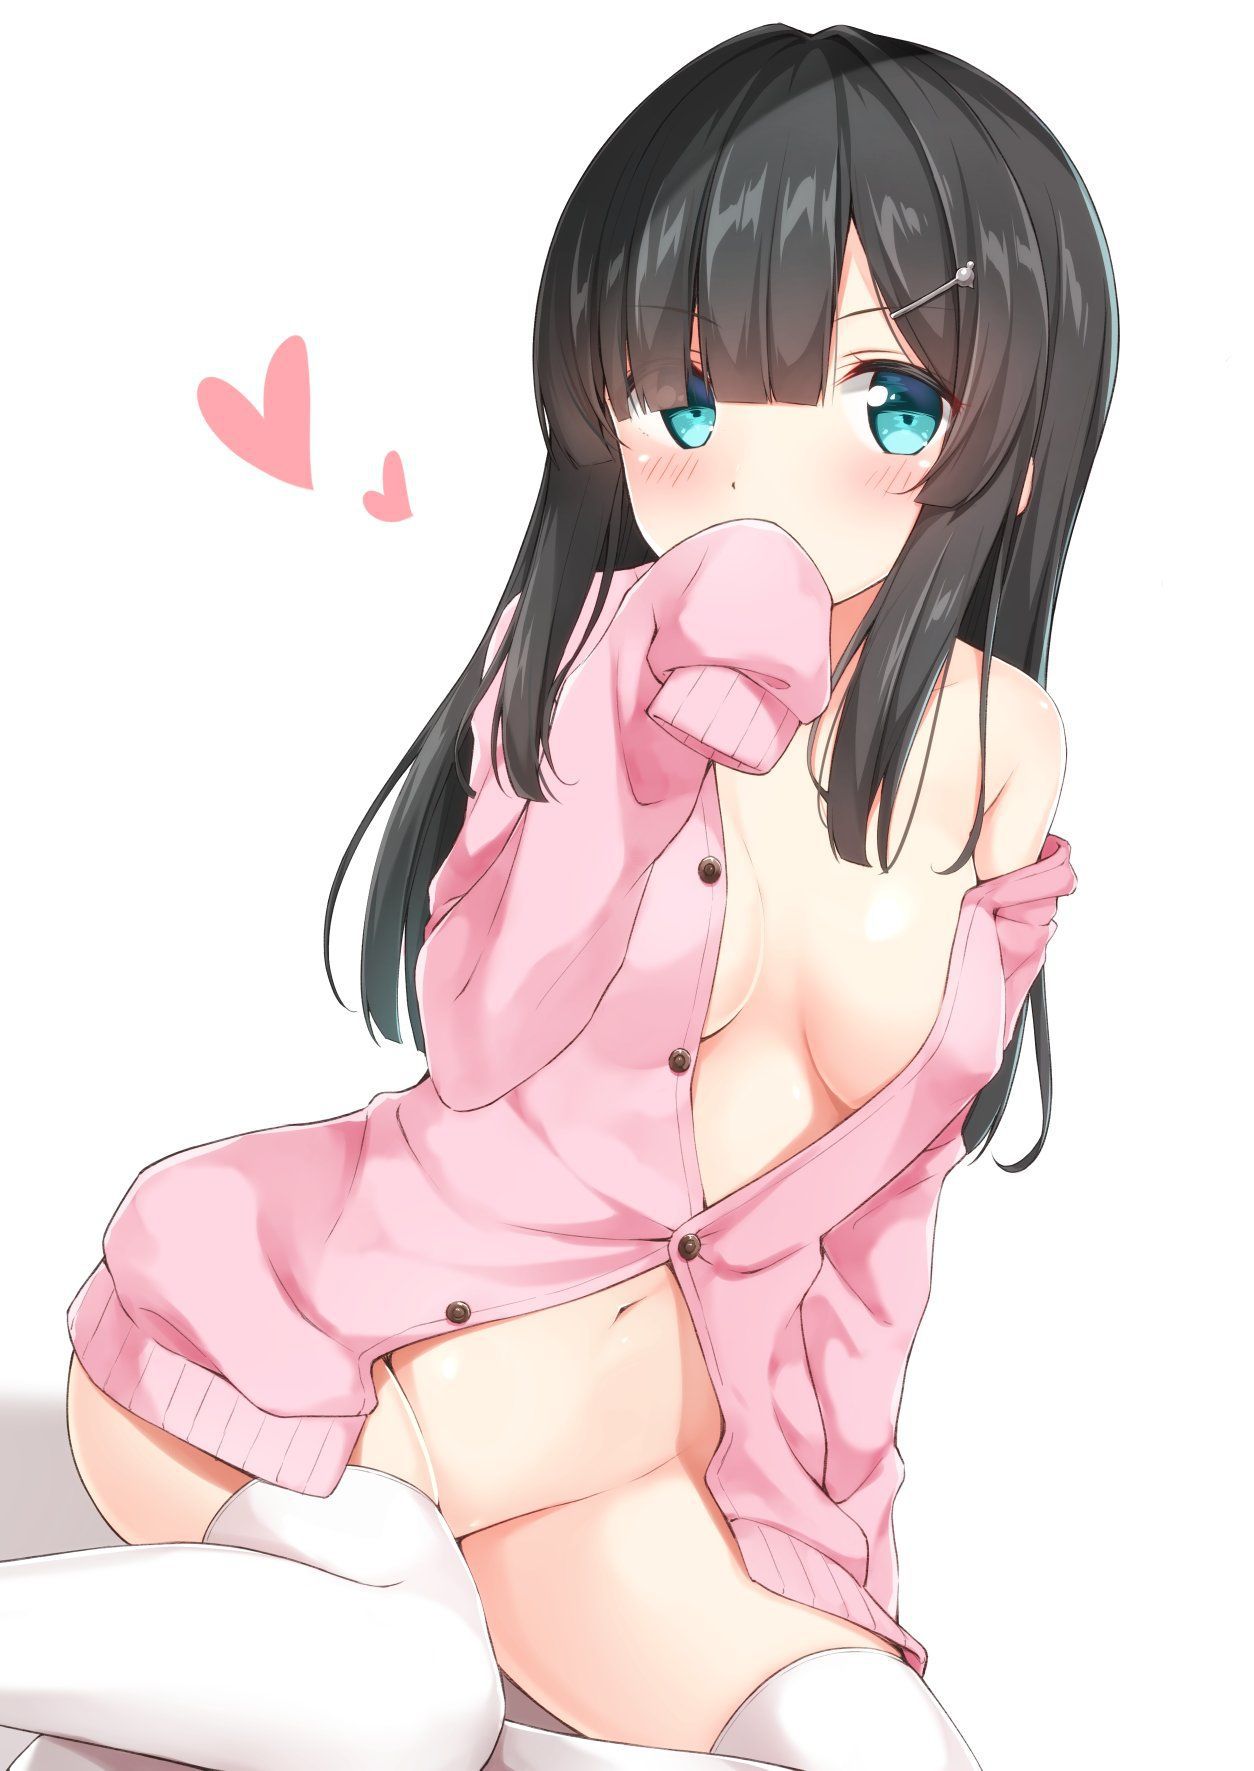 [Secondary ZIP] image of the thighhighs girl showing annoying thigh 34